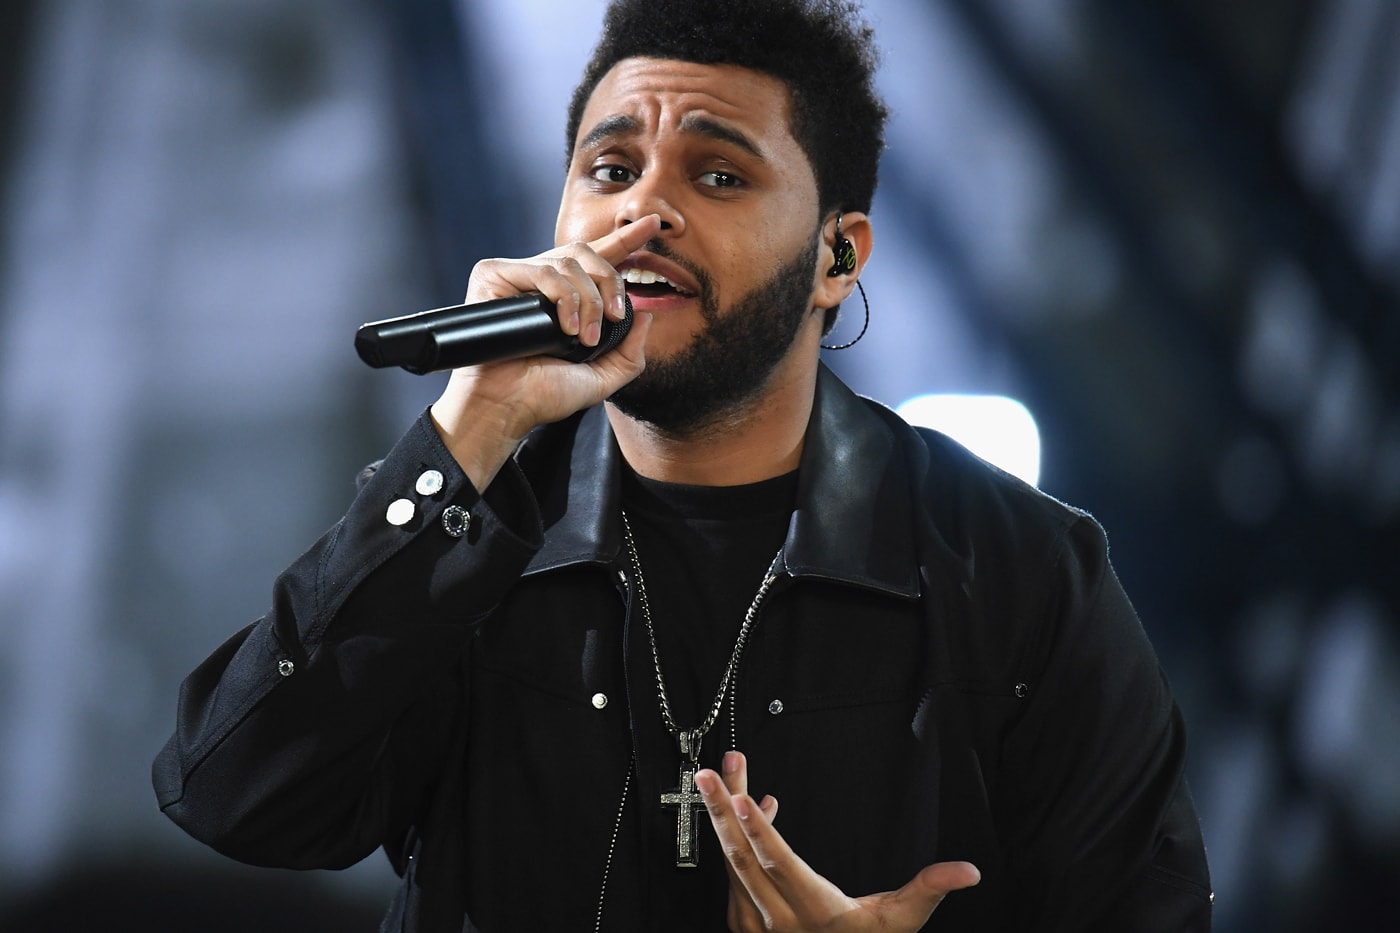 the-weeknd-schoolboy-q-metro-boomin-leon-bridges-kehlani-more-featured-on-forbes-30-under-30